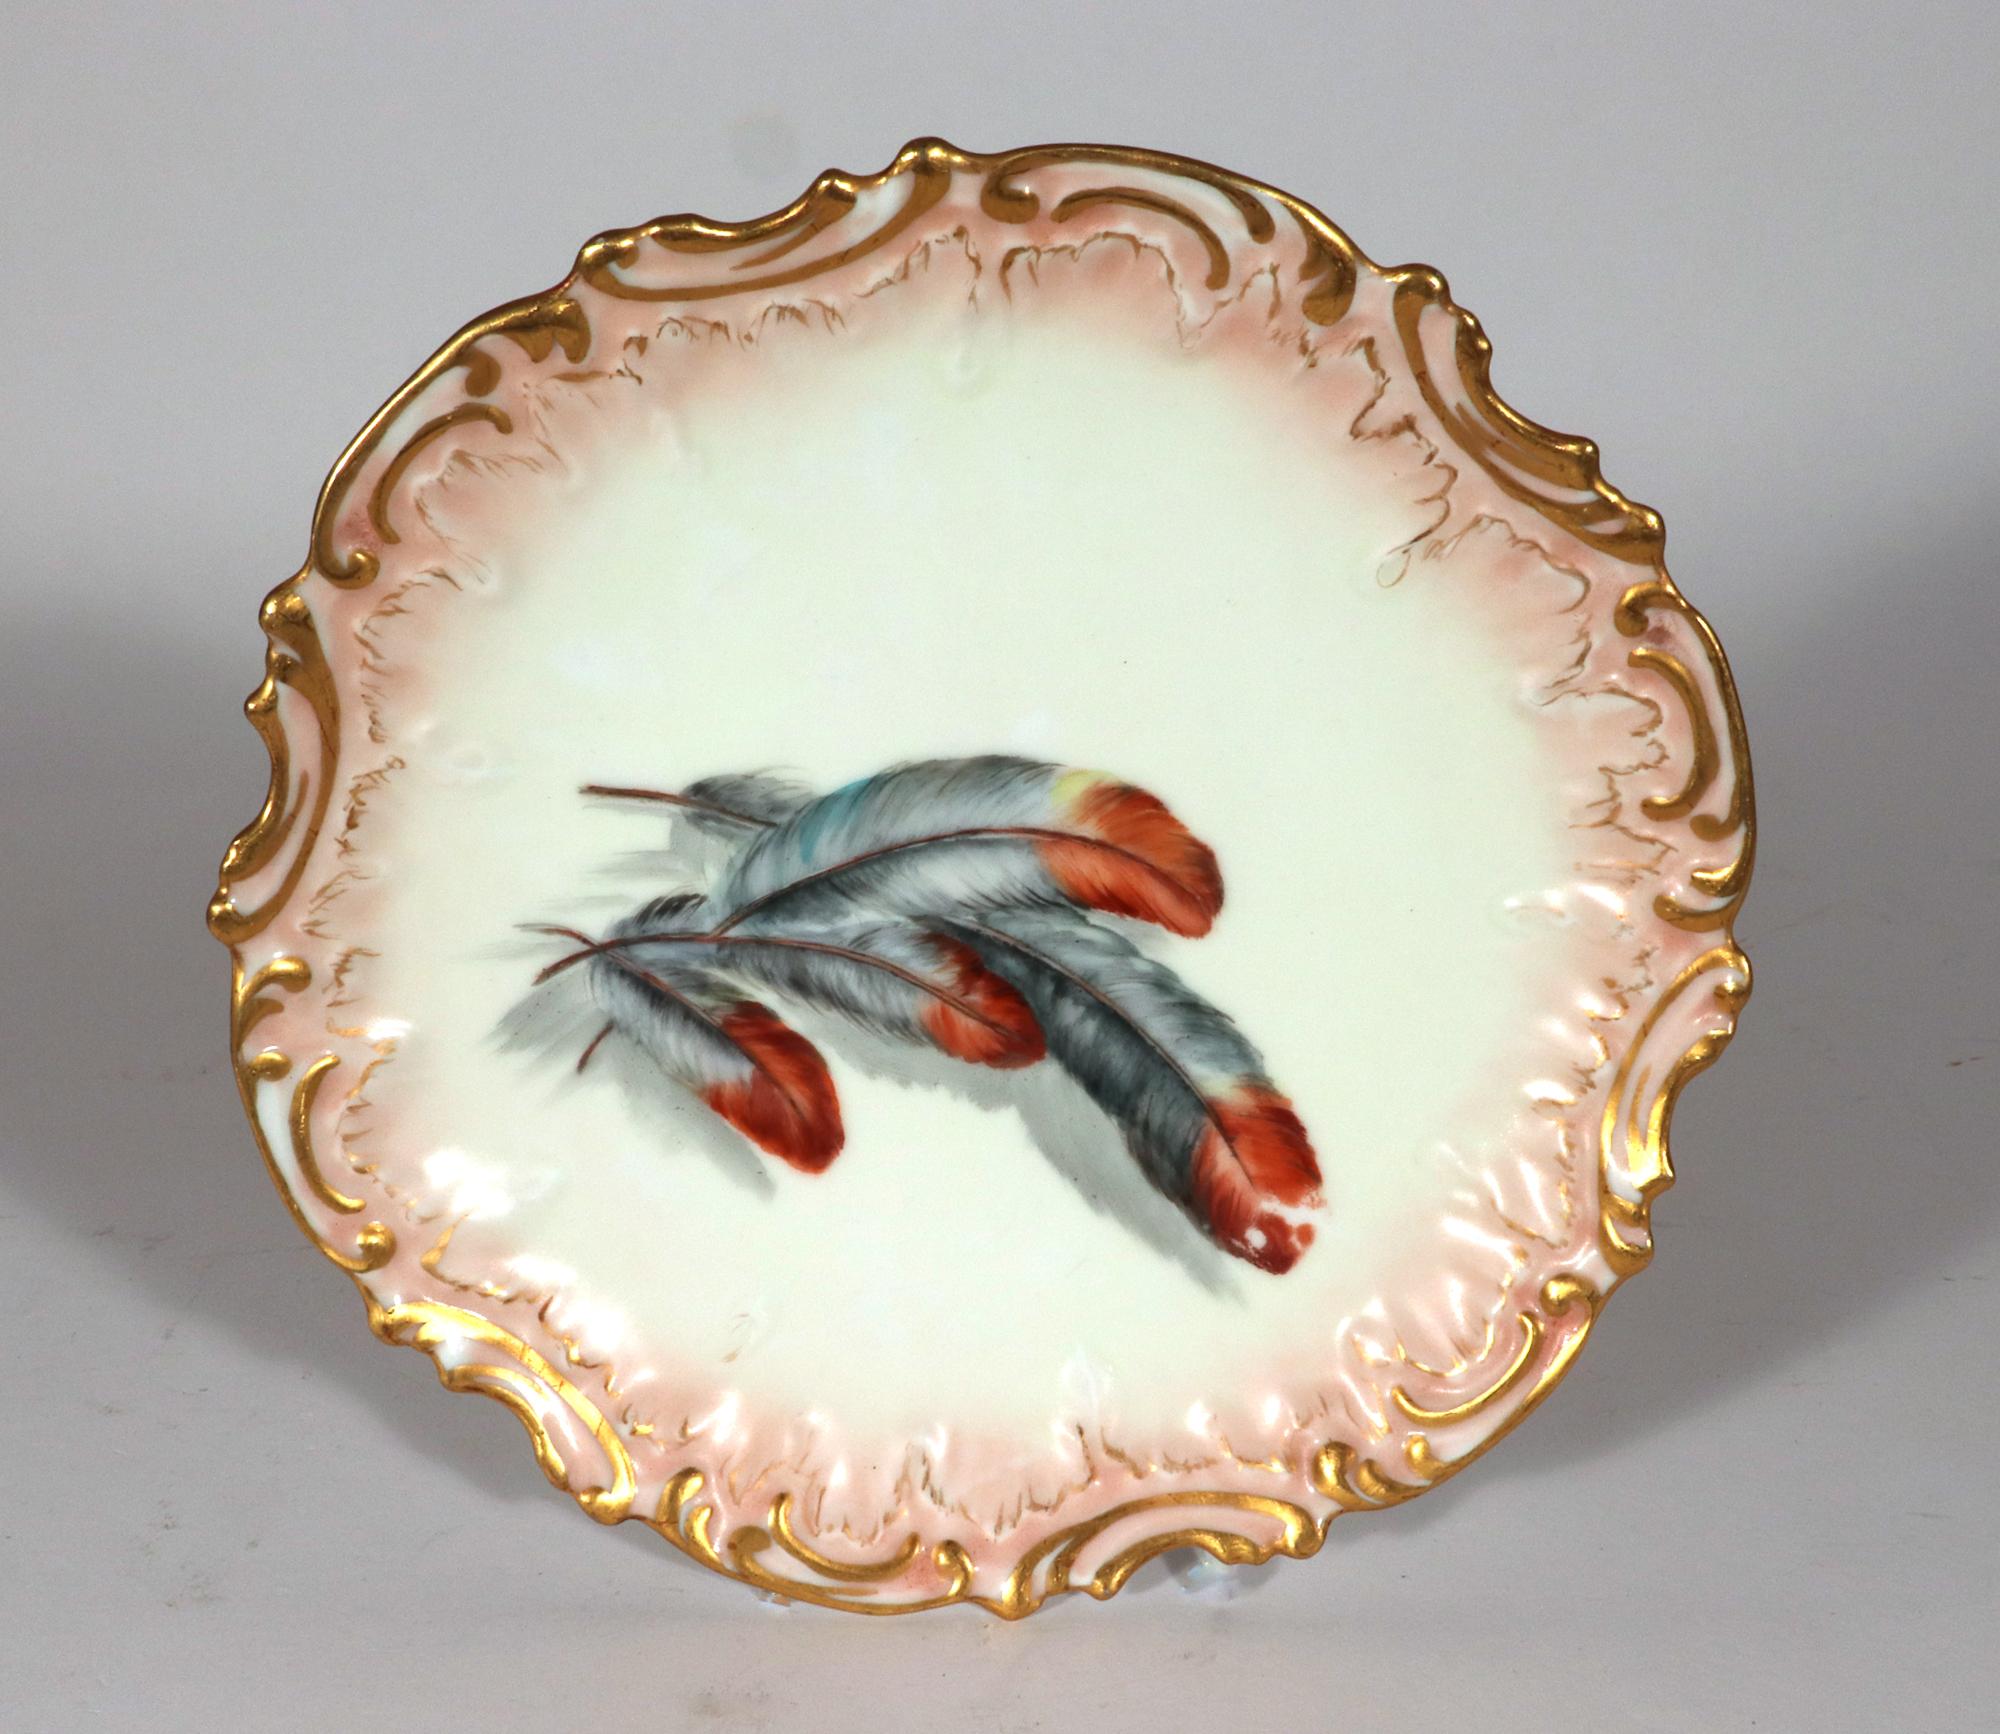 Limoges Porcelain Dessert Plates decorated with Feathers, Set of Ten 5